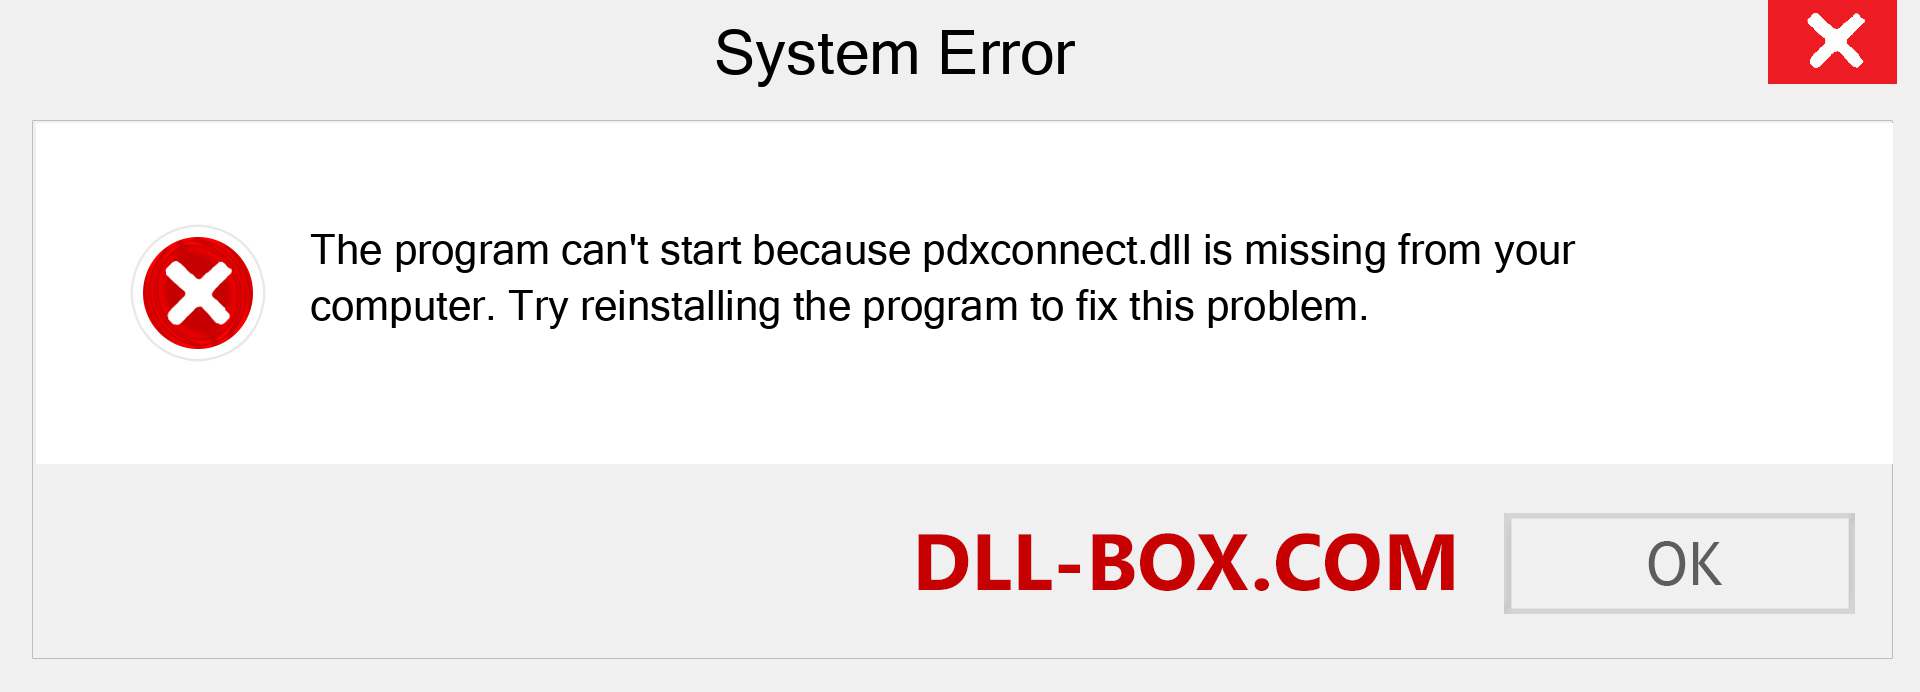  pdxconnect.dll file is missing?. Download for Windows 7, 8, 10 - Fix  pdxconnect dll Missing Error on Windows, photos, images